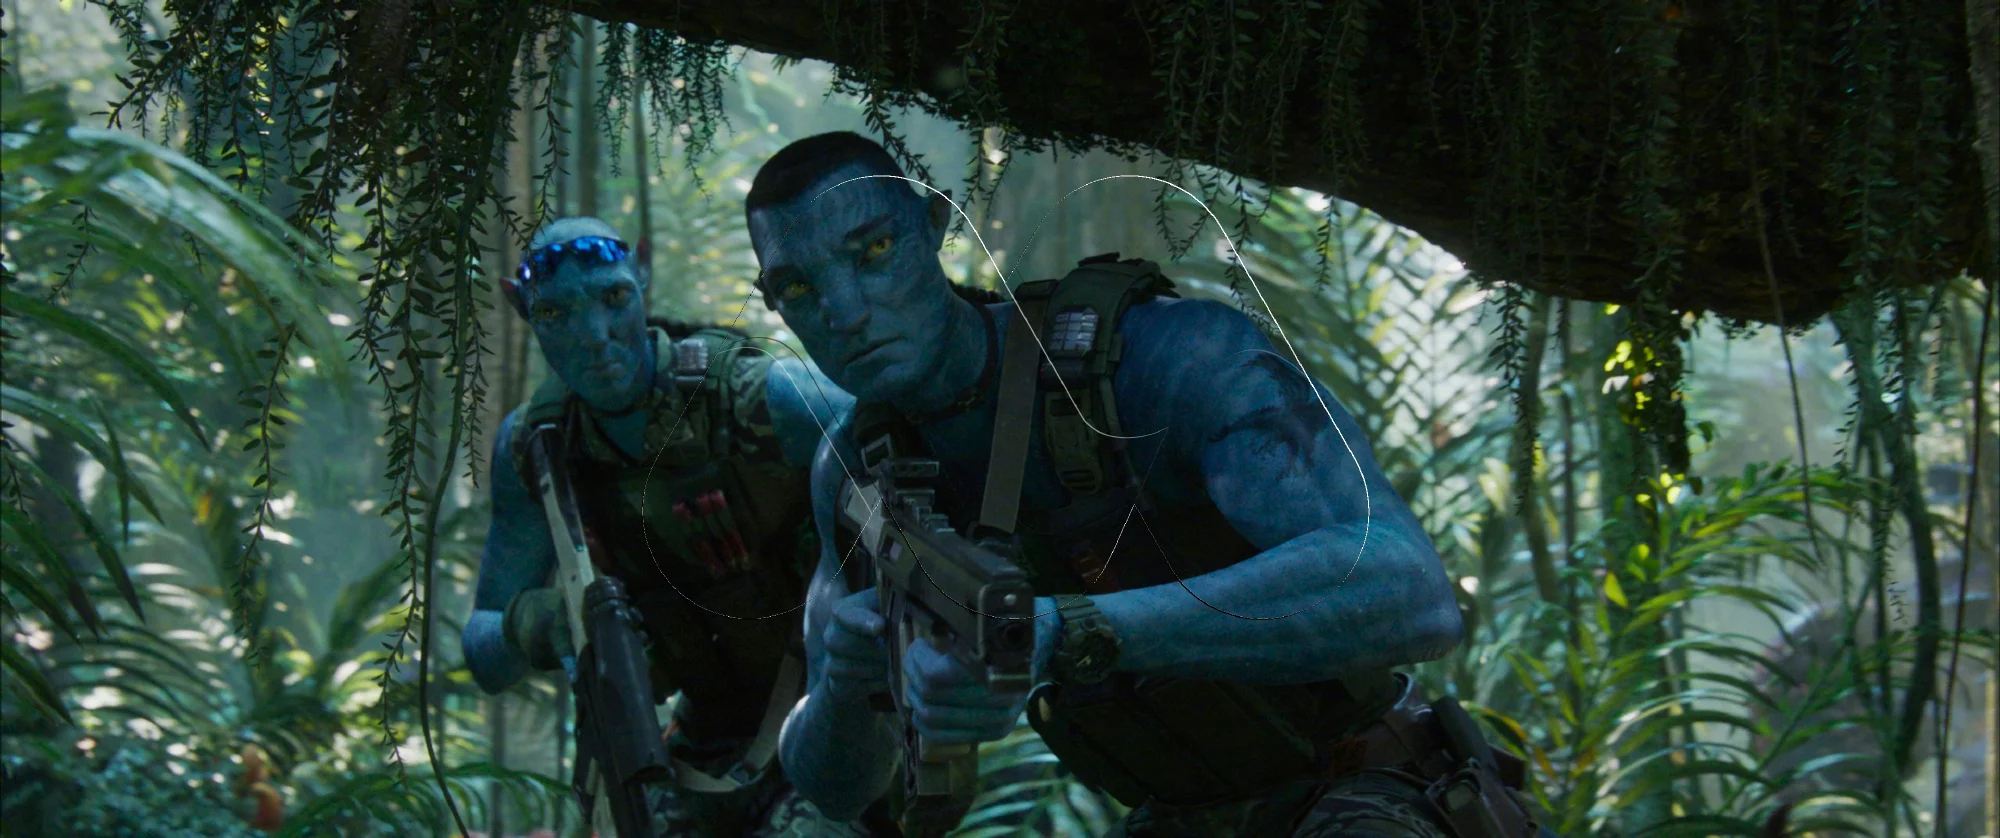 avatar-the-way-of-water-exposes-massive-new-stills-12